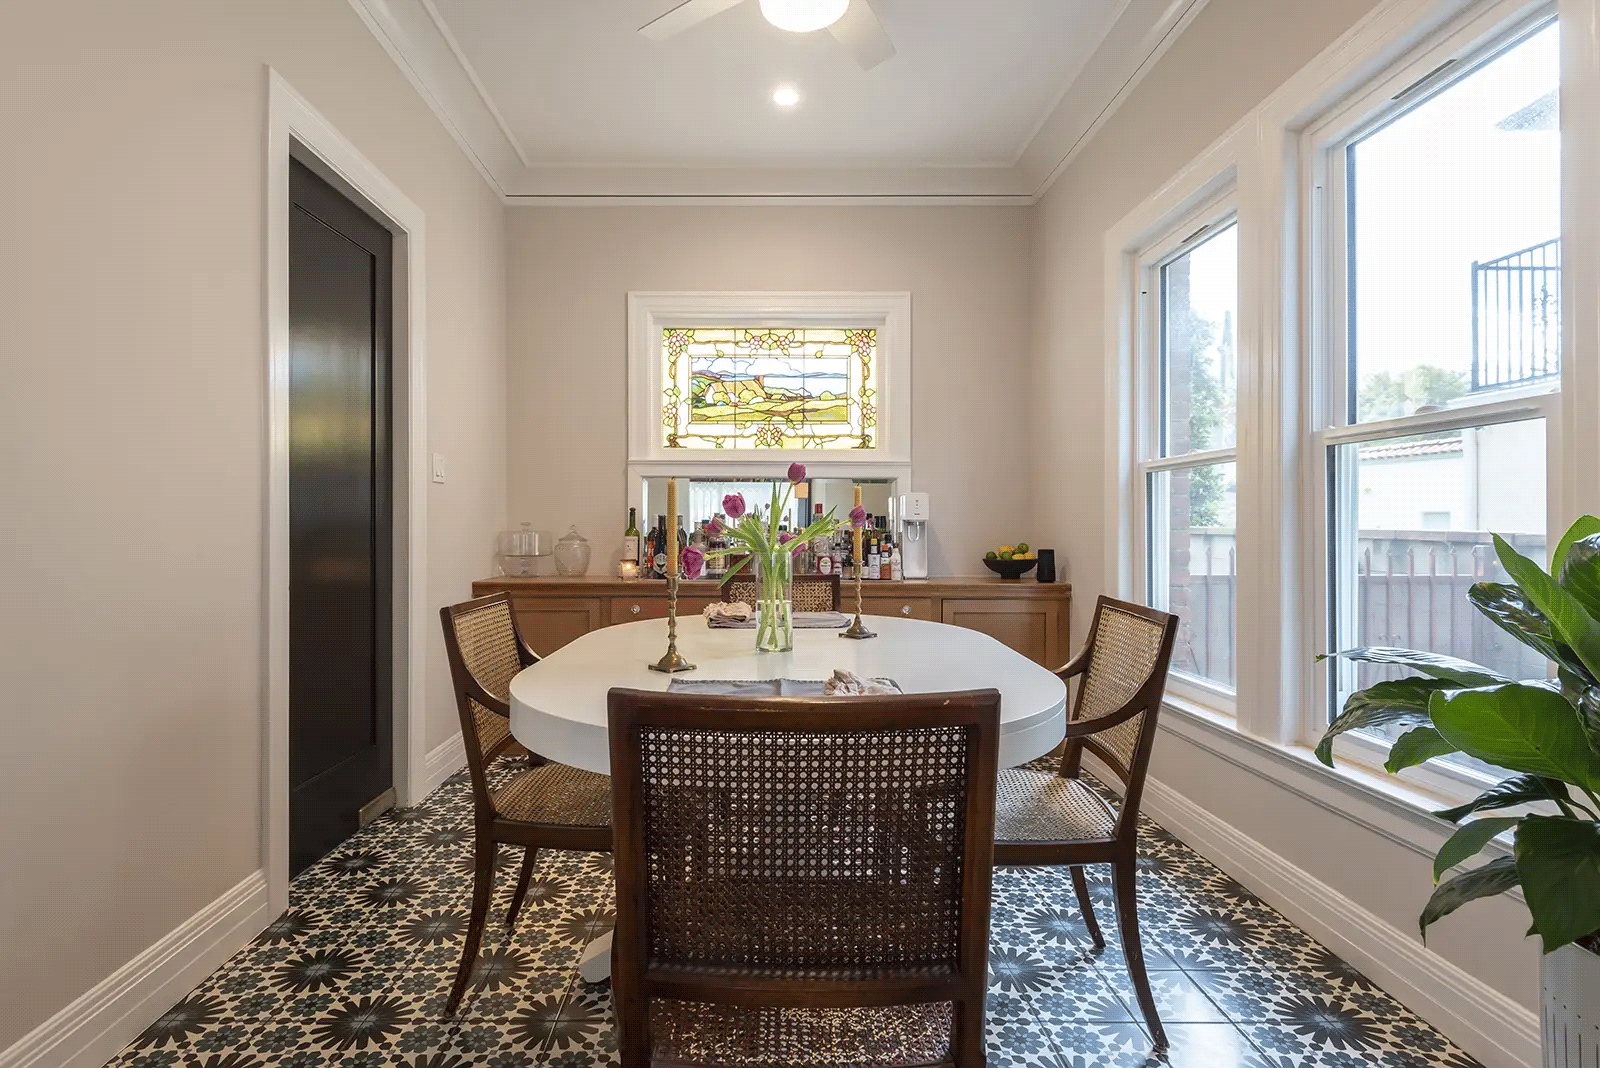 dining area with patterned floor tile in home remodel in mid city